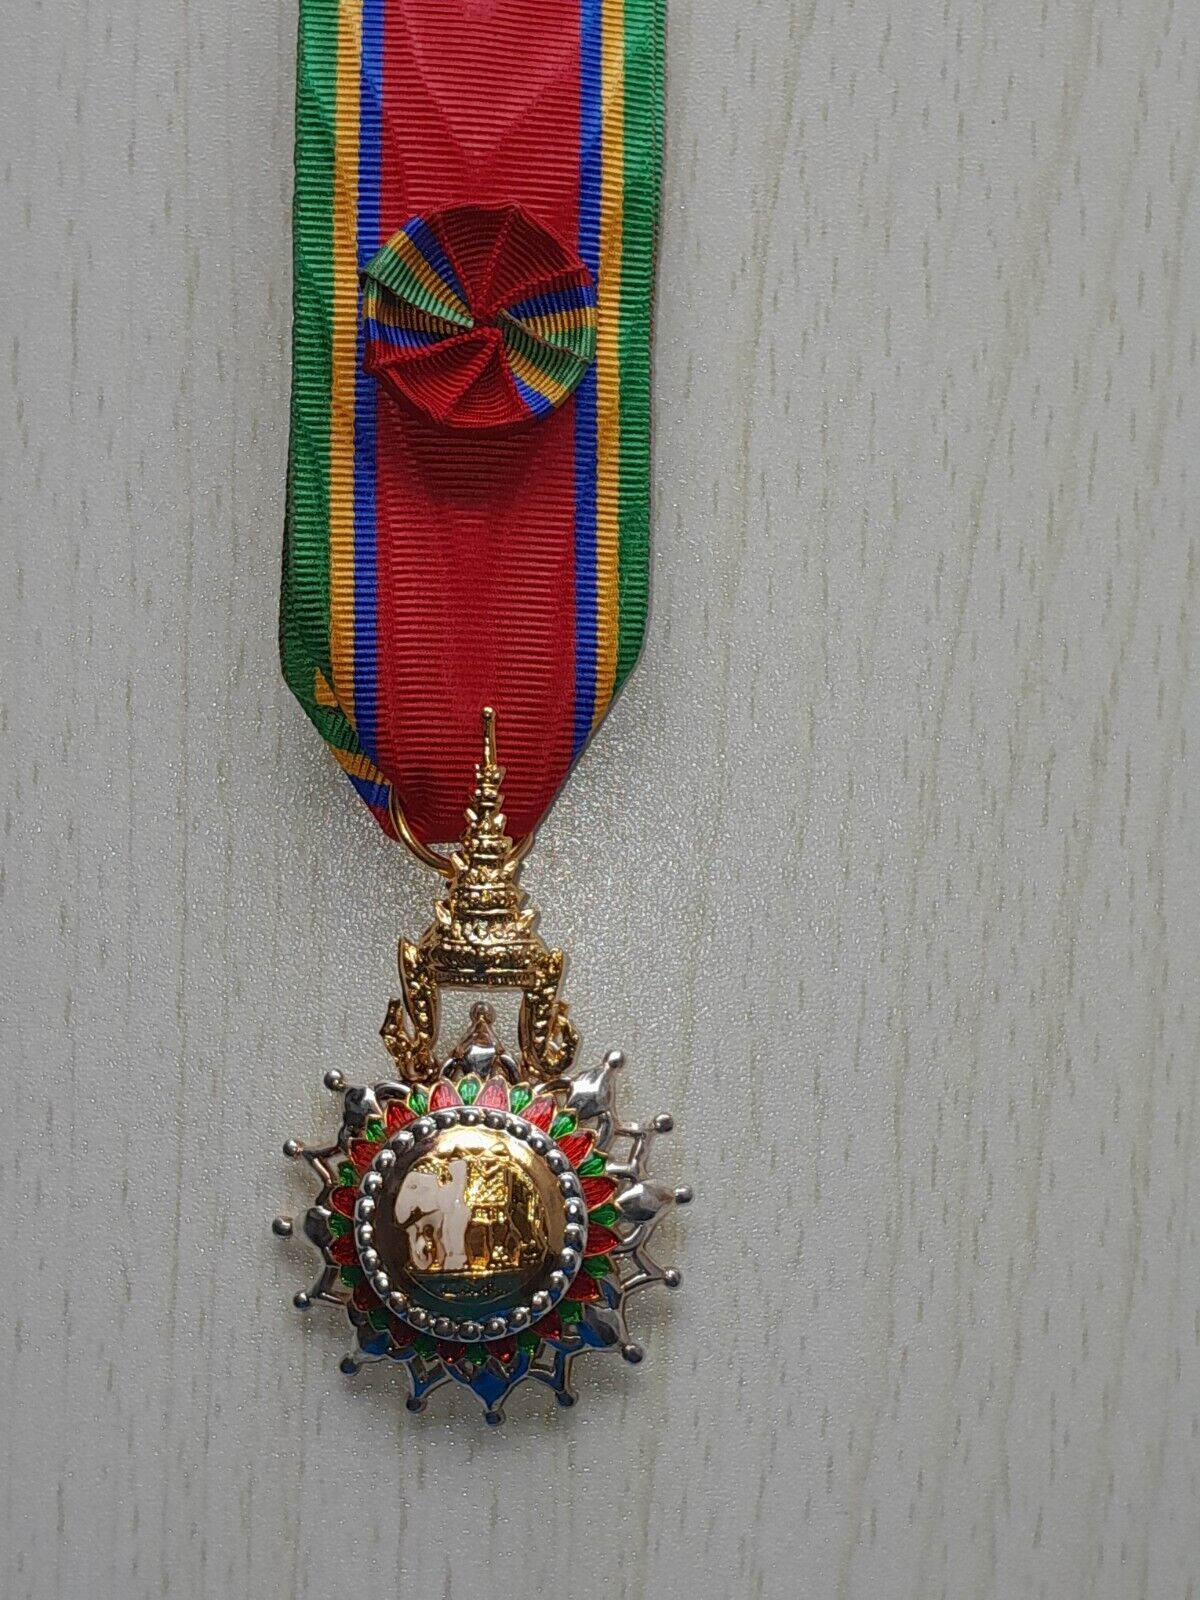 THAILAND ORDER OF THE WHITE ELEPHANT, 4TH CLASS-MINIATURE MEDAL